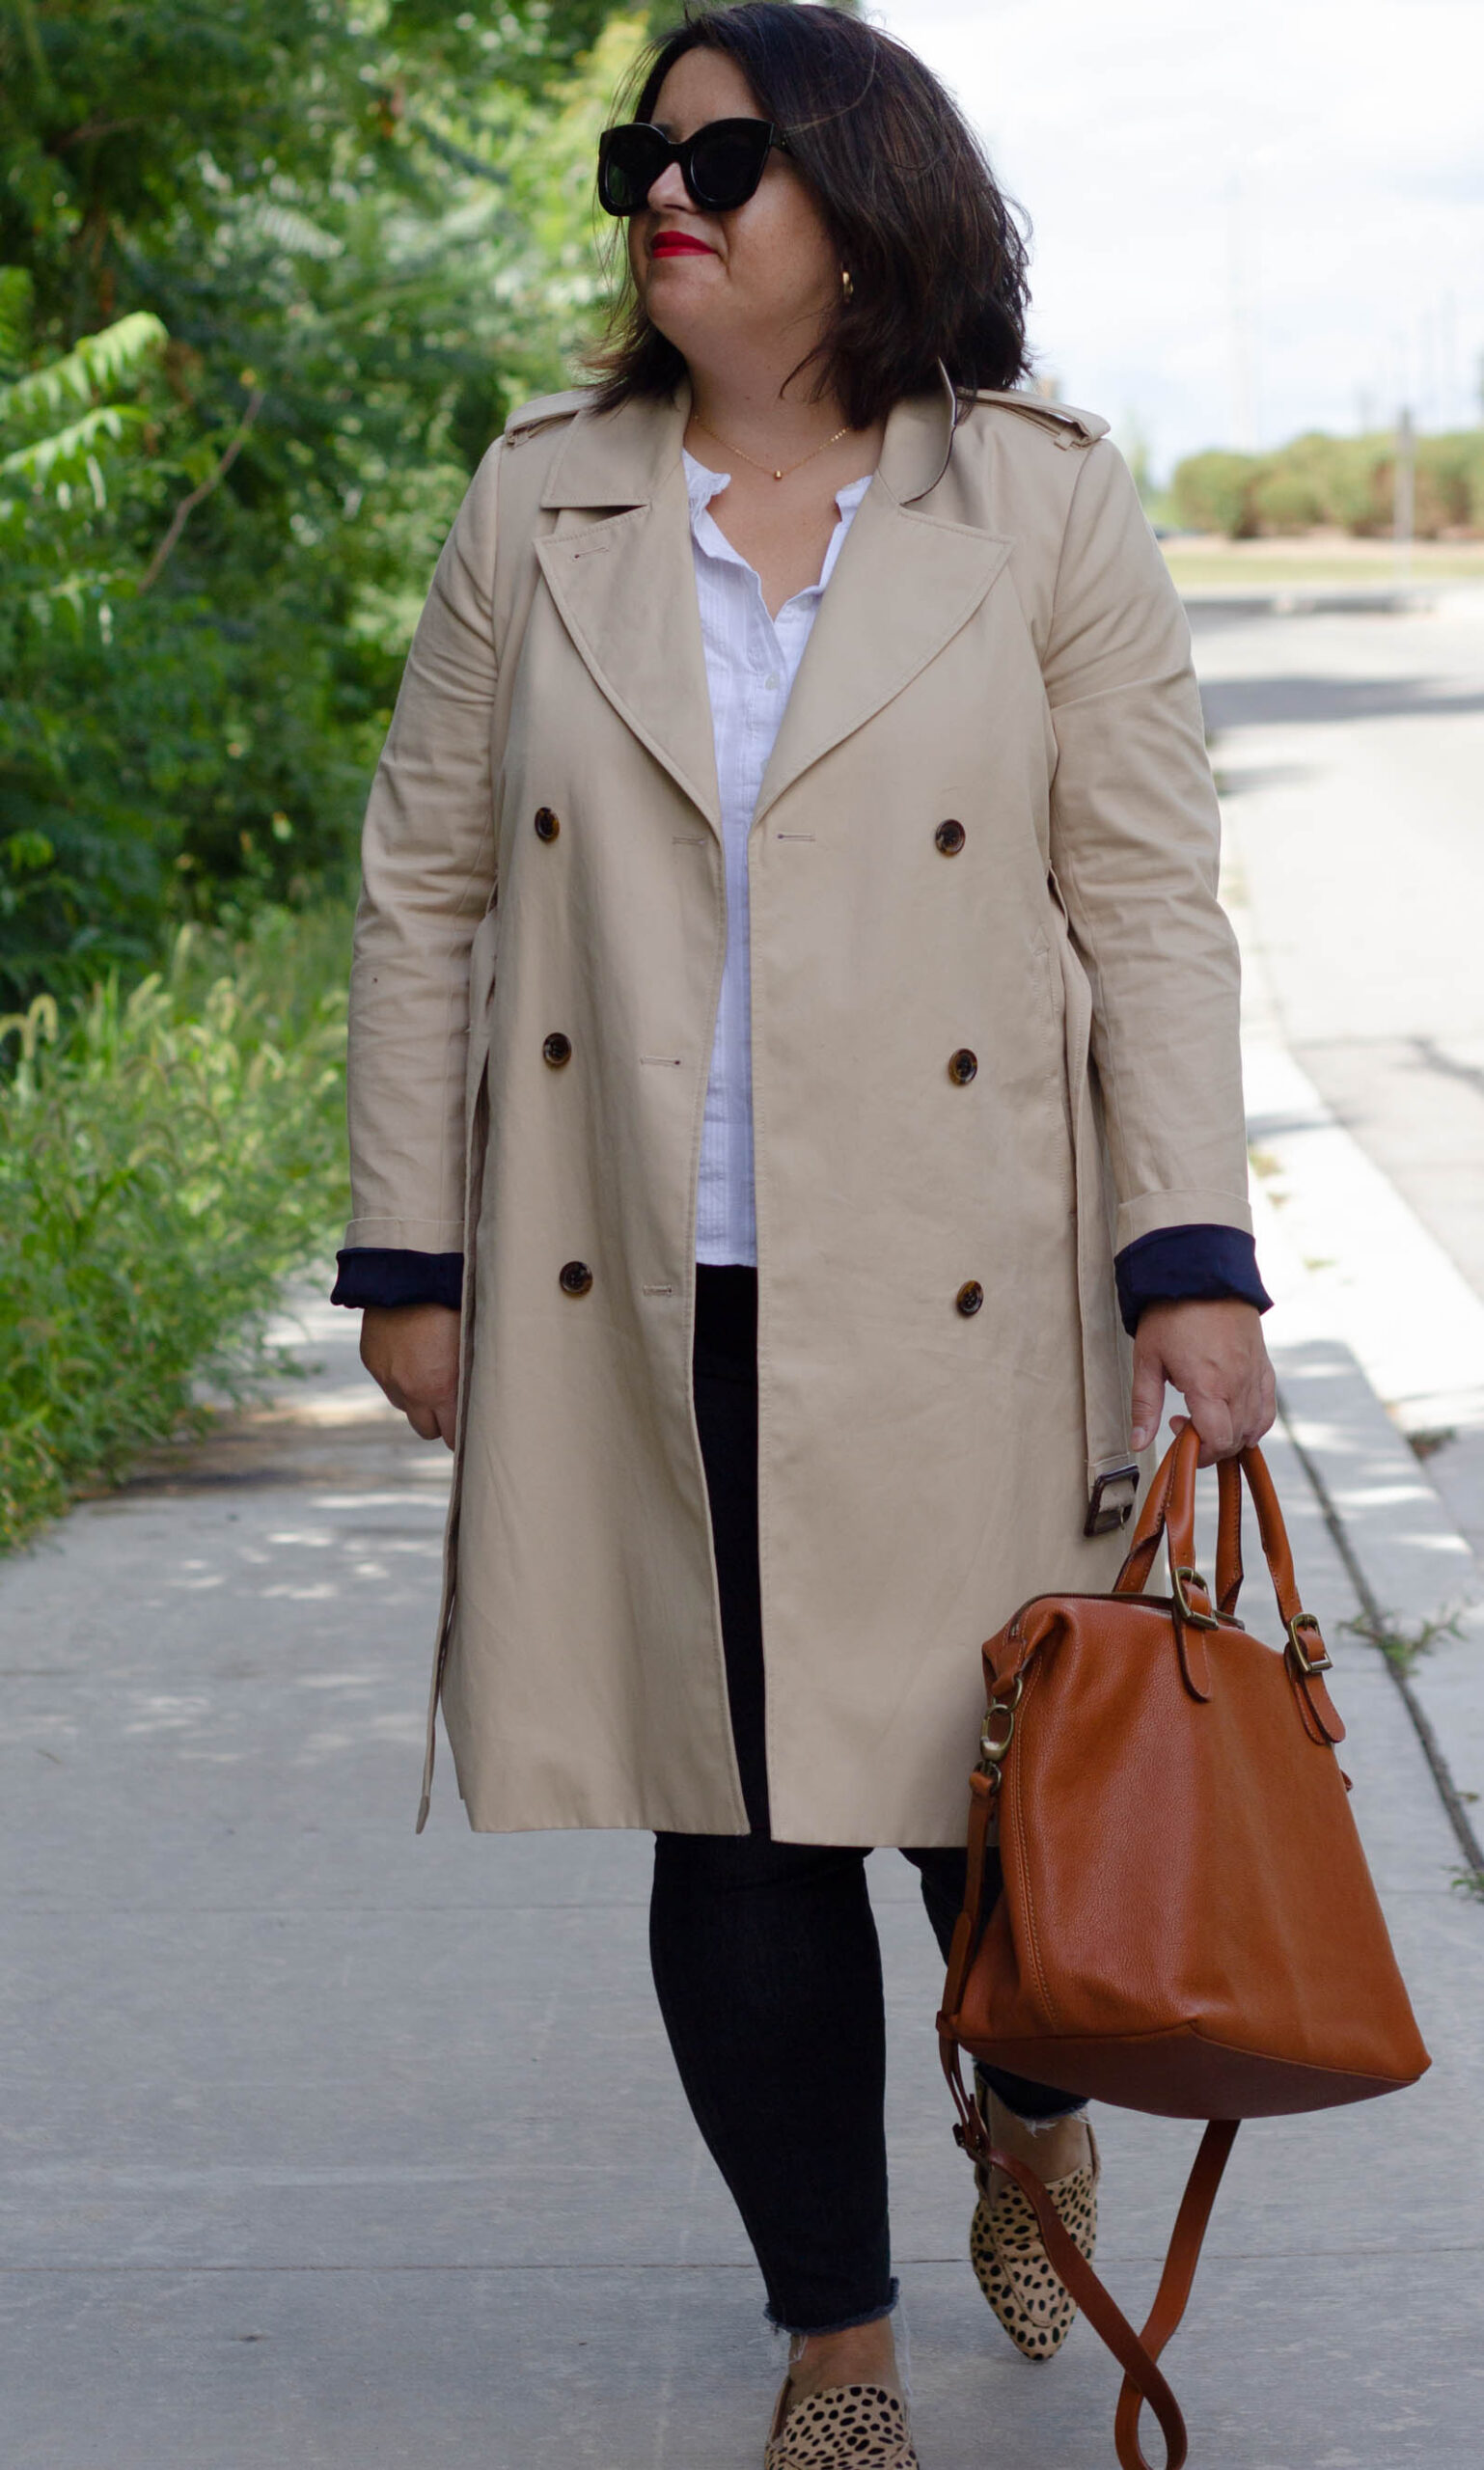 jcrew icon trench coat outfit